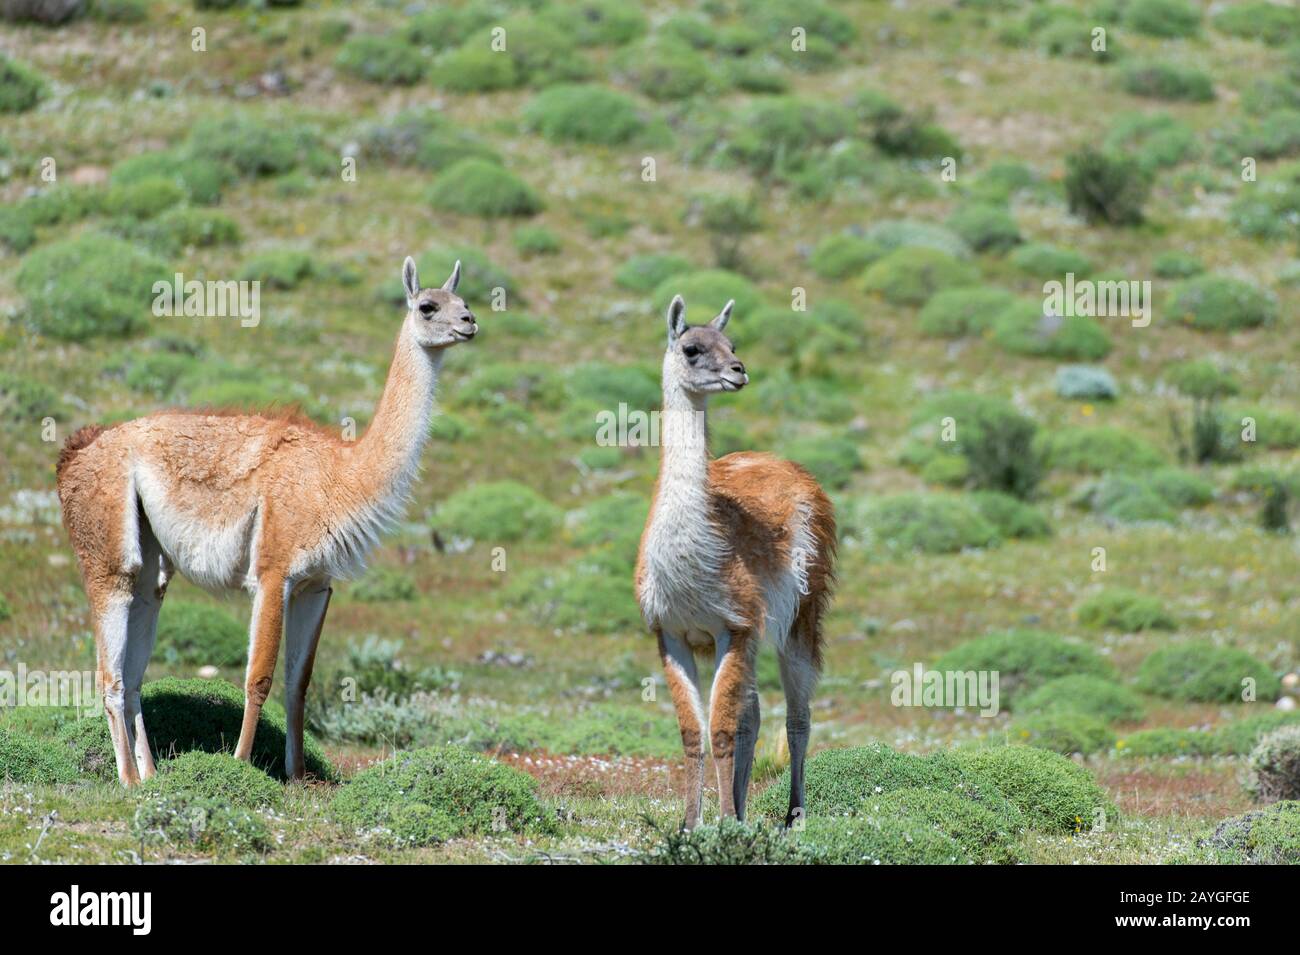 Guanacos (Lama guanicoe) in Torres del Paine National Park in Patagonia, Chile. Stock Photo